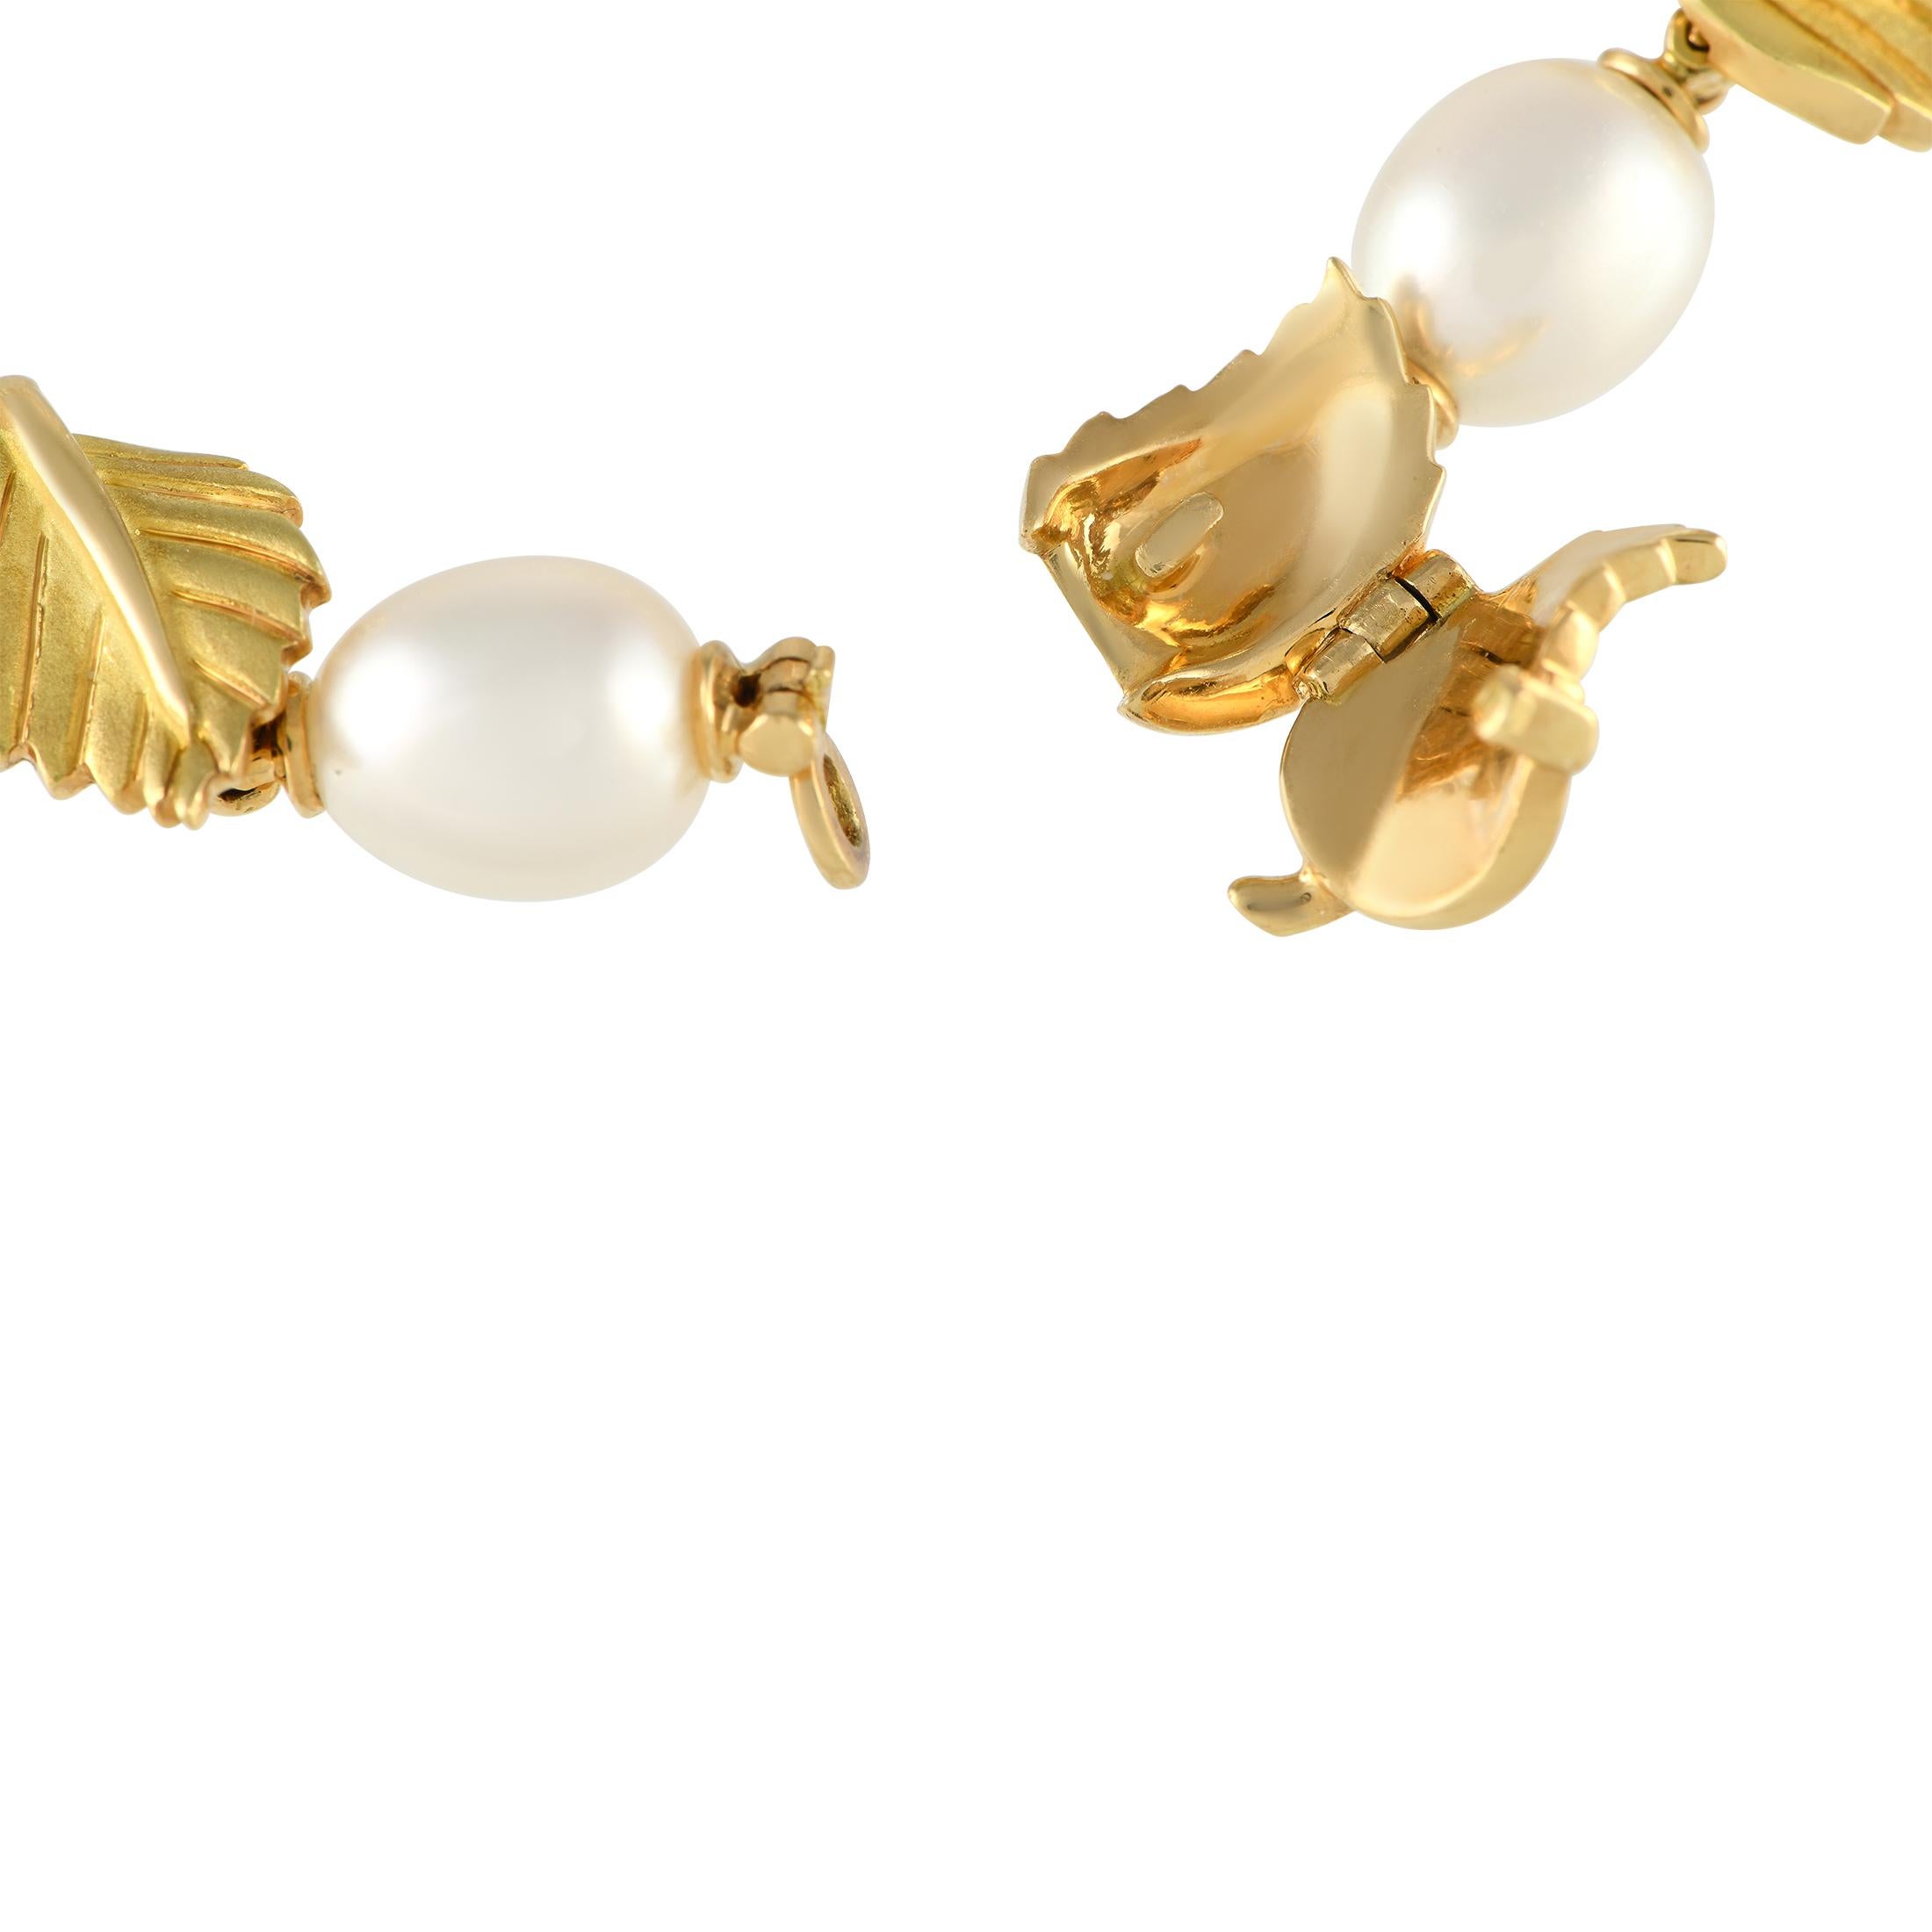 tiffany gold pearl necklace